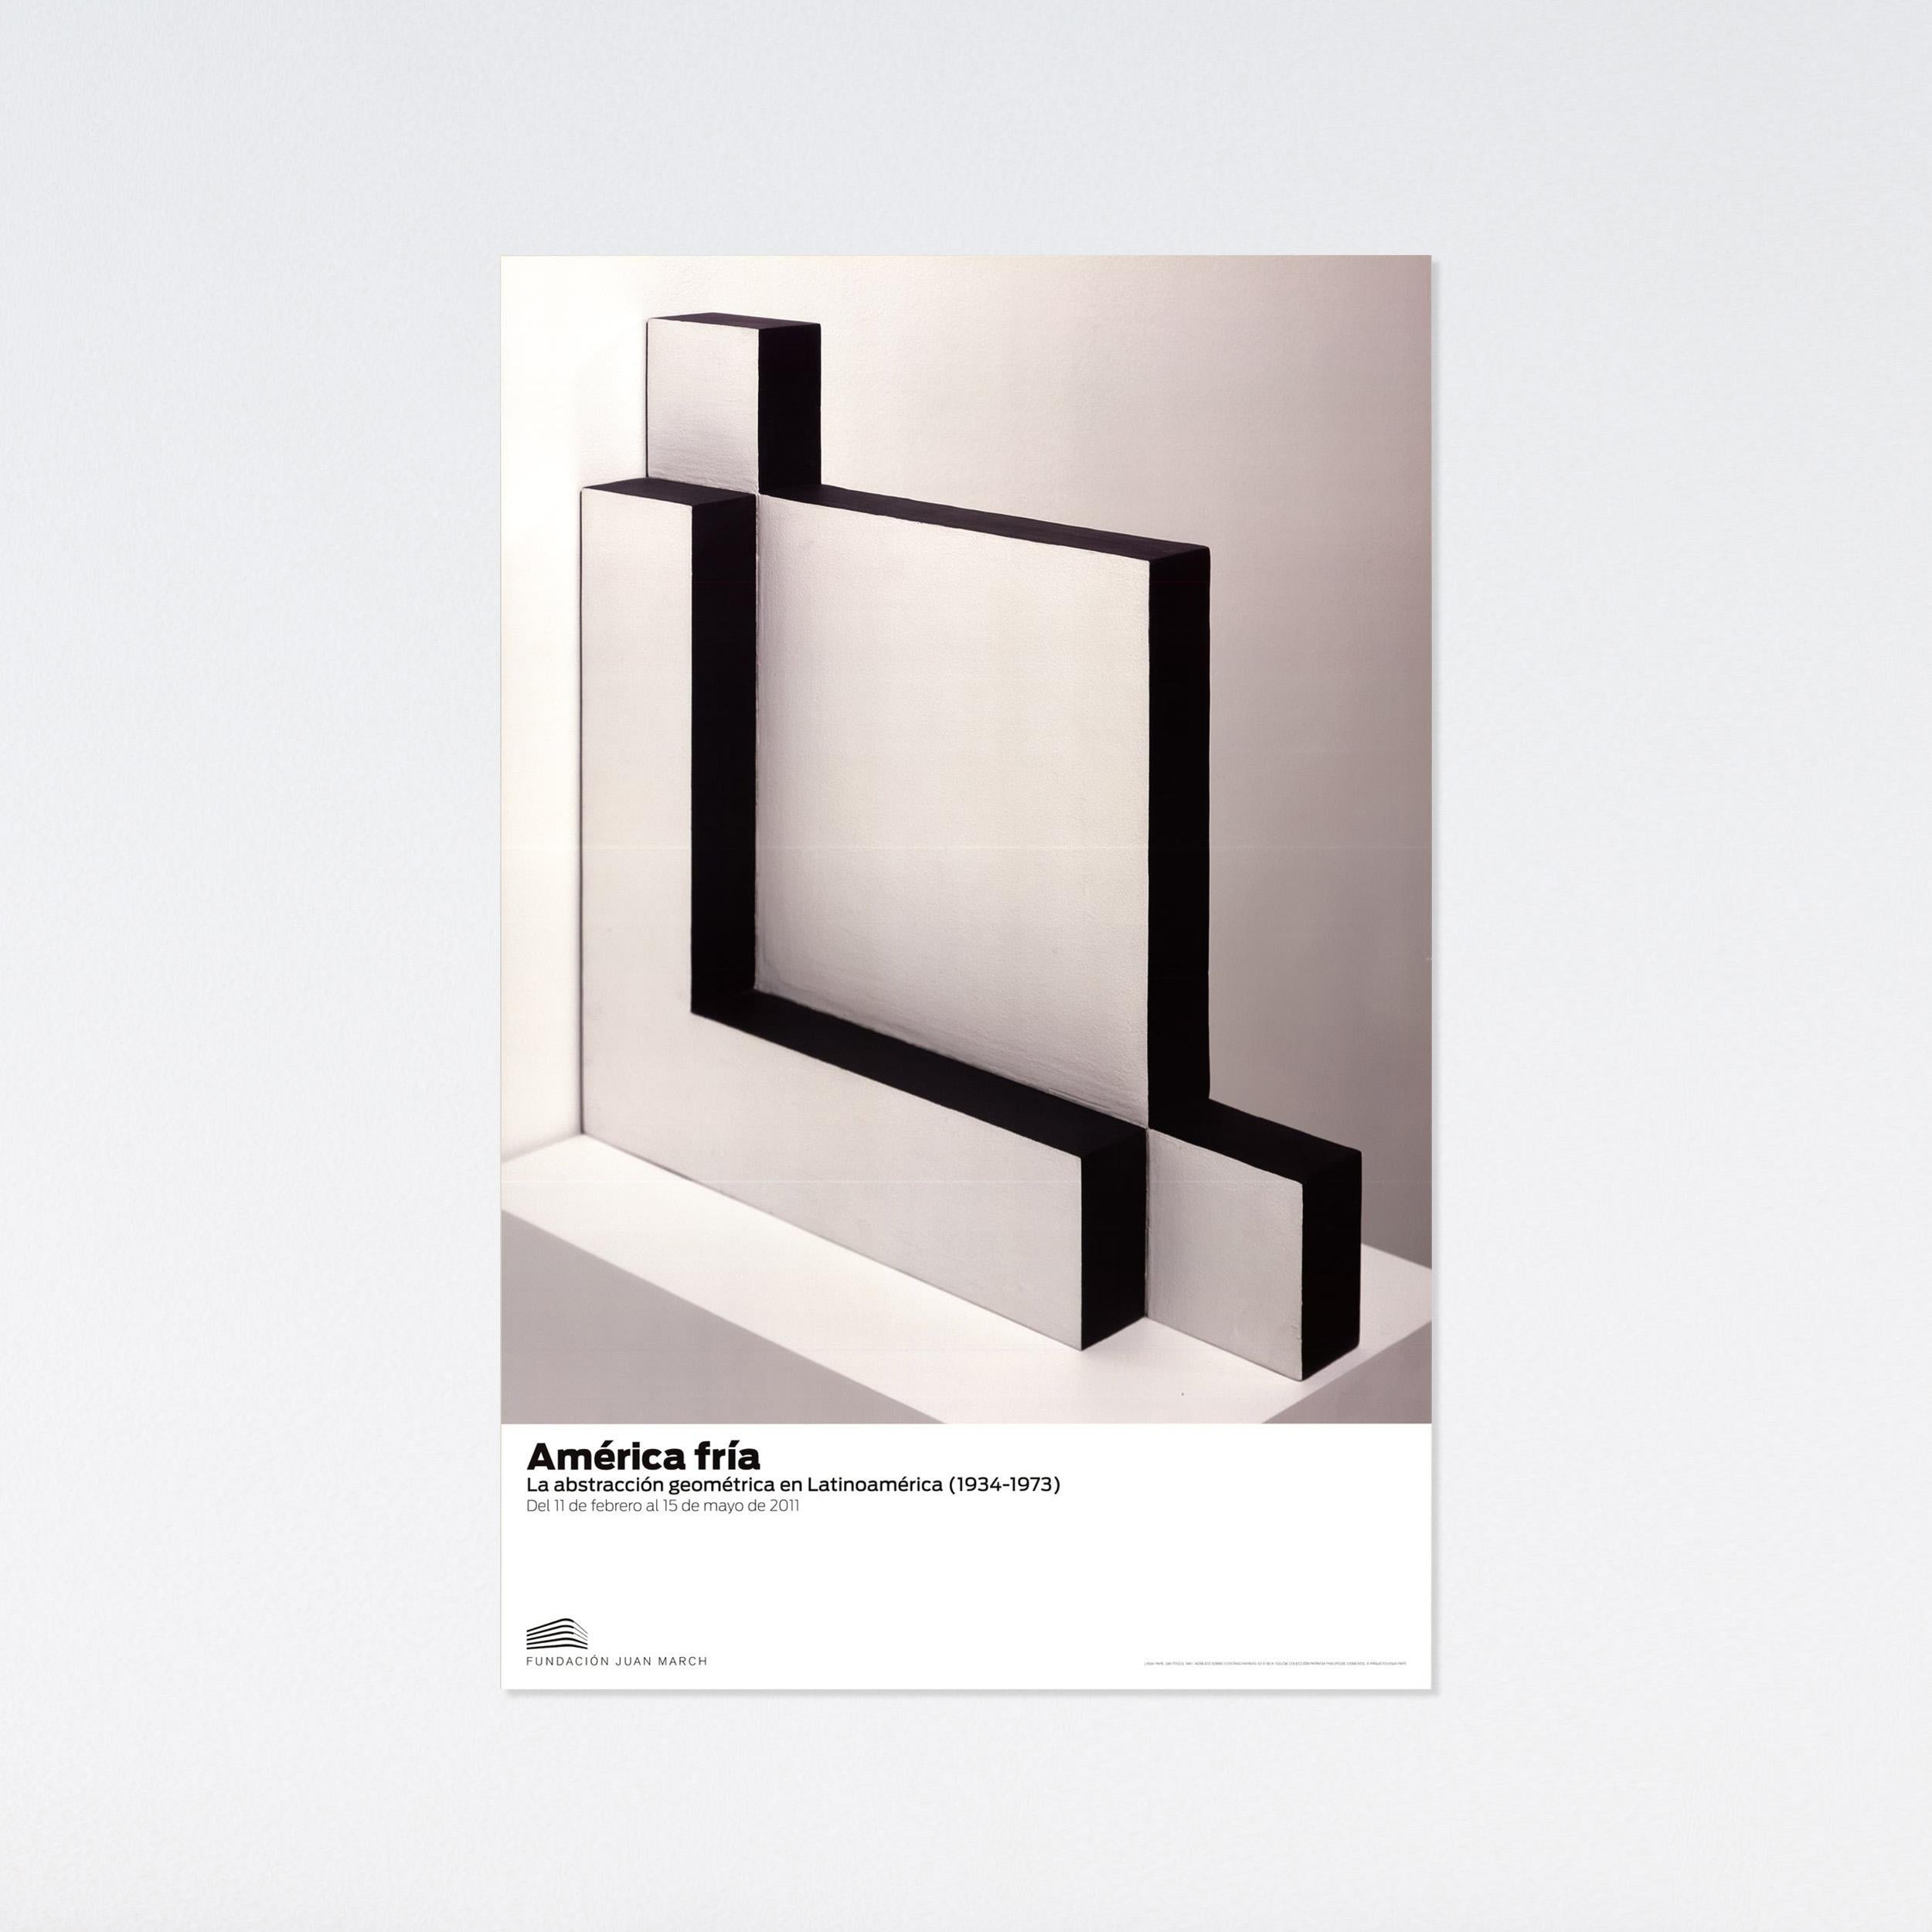 Exhibition poster published by Juan March Foundation in Spain (Feb - May 2011).

Poster is sold unframed. Ship rolled in a protected mailing tube.

About the exhibition:
Mapping the history —complex and fragmented— of geometric abstraction in Latin